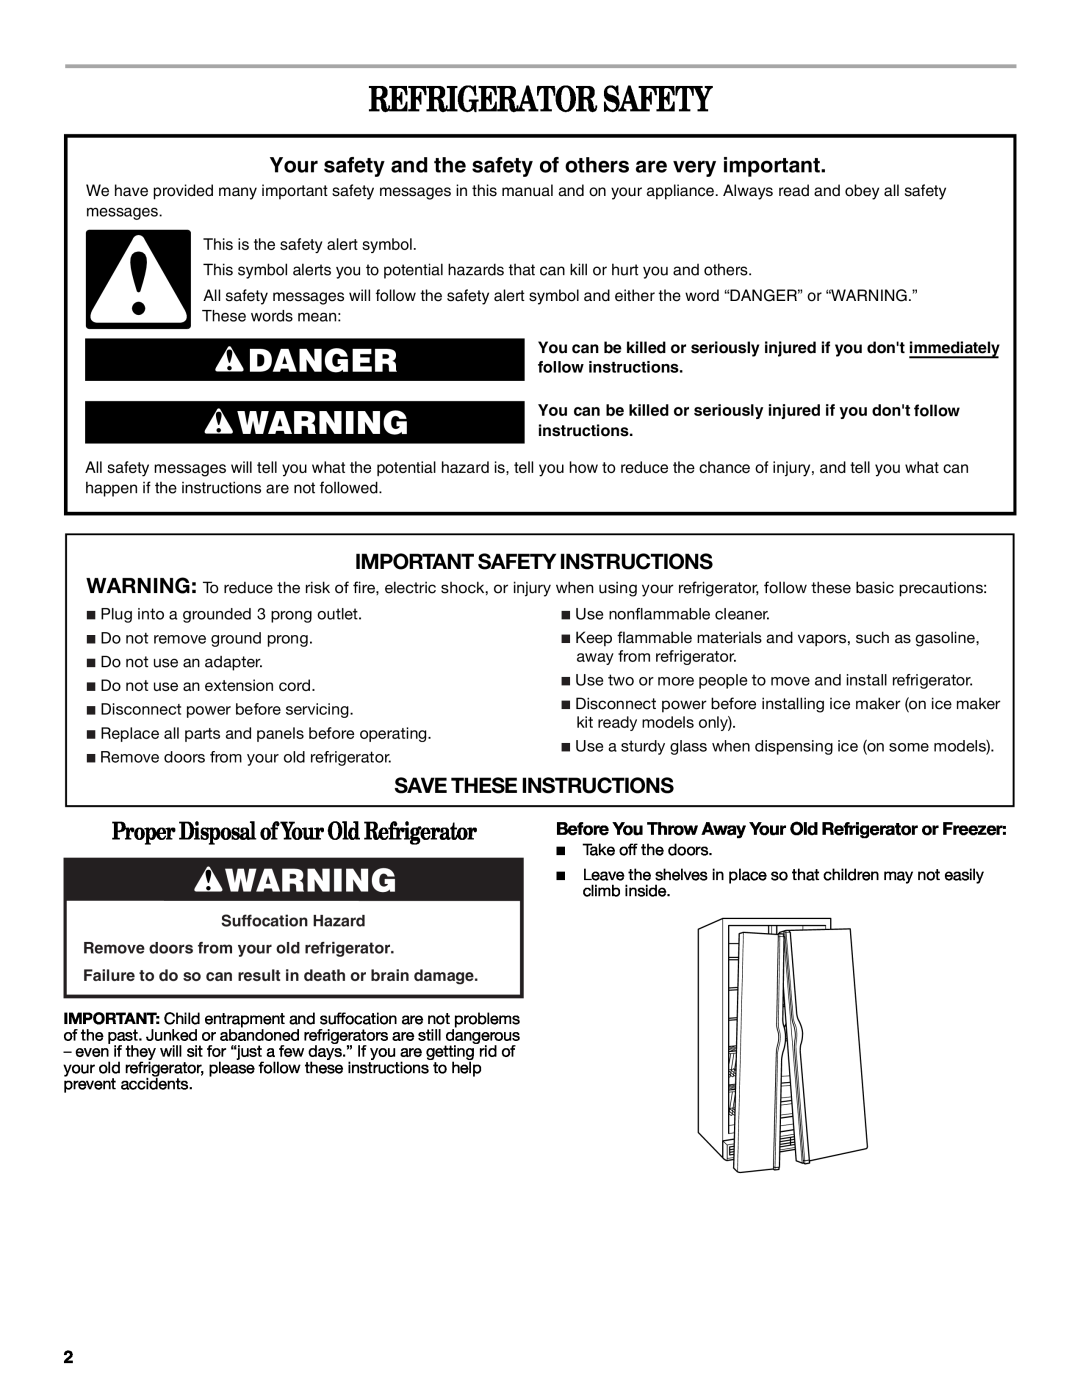 Whirlpool ED2NHGXRQ01, ED2LHAXML10 Refrigerator Safety, Danger, Important Safety Instructions, Save These Instructions 